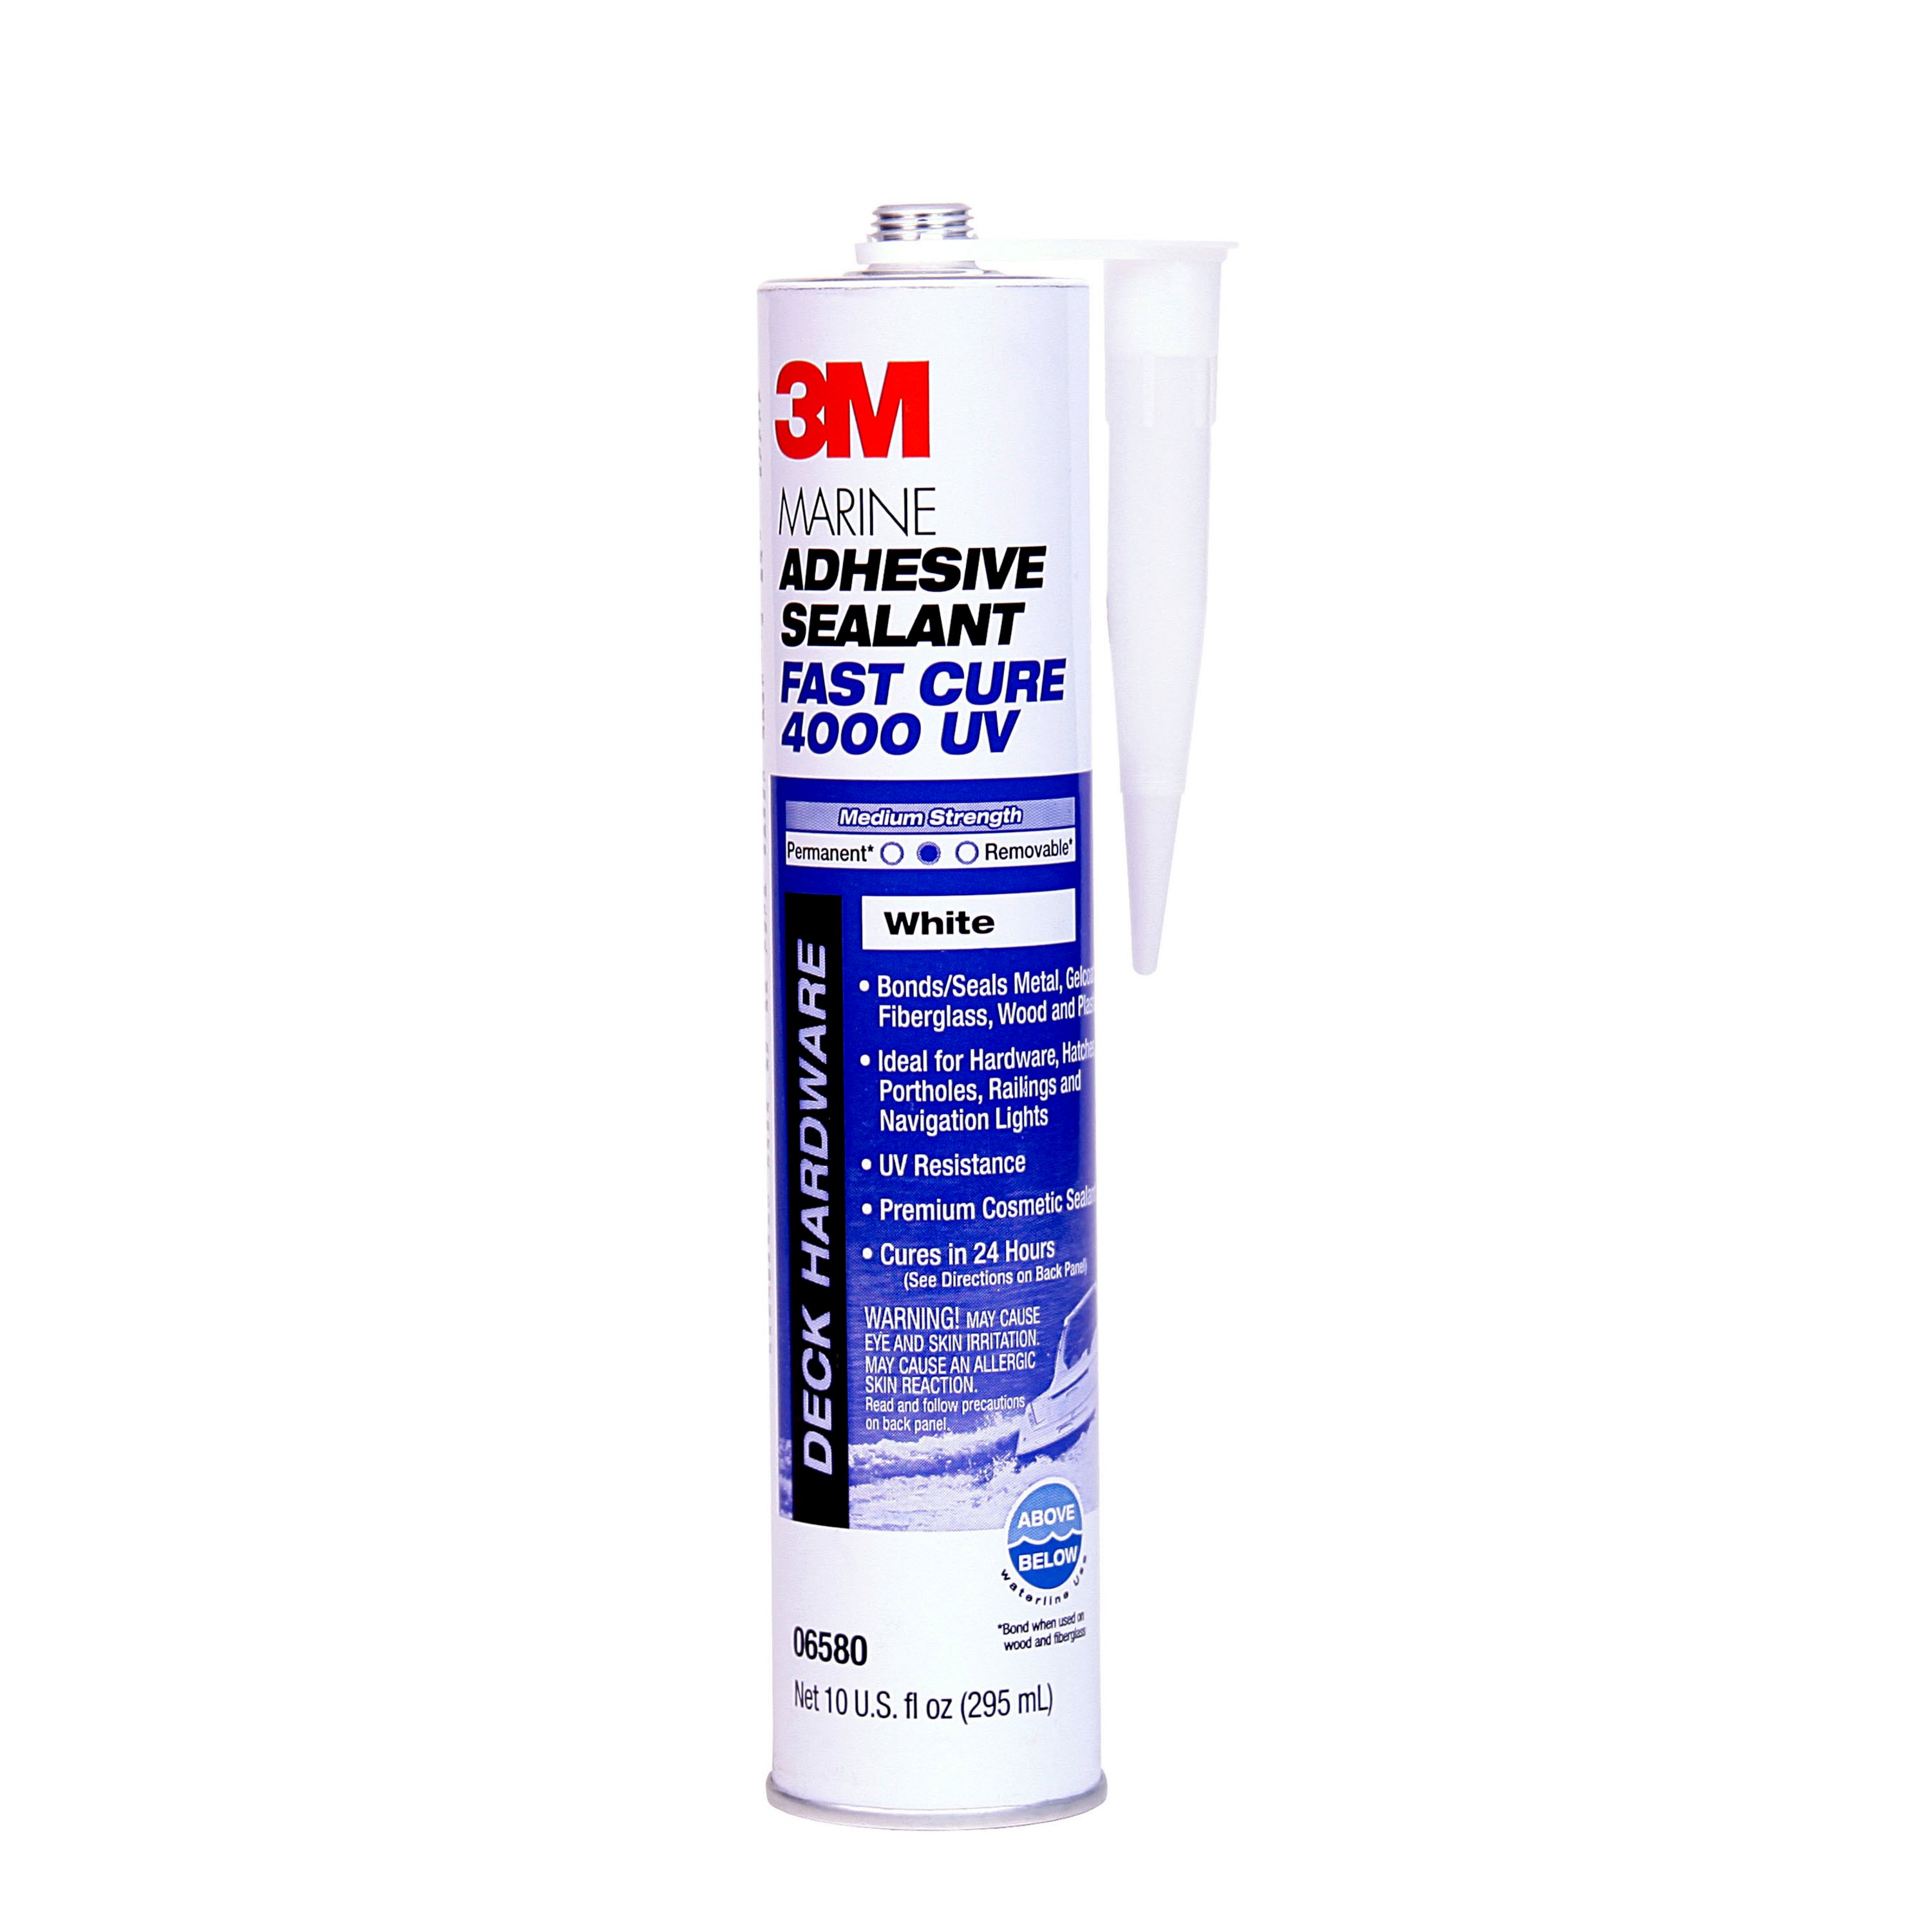  3M™ Marine Adhesive Sealant 4000 UV is a one-part adhesive sealant formulated to provide an exceptionally strong bond for harsh conditions as well as flexibility to combat vibrations, swelling, shrinking or shock common on boats or other marine applications. 